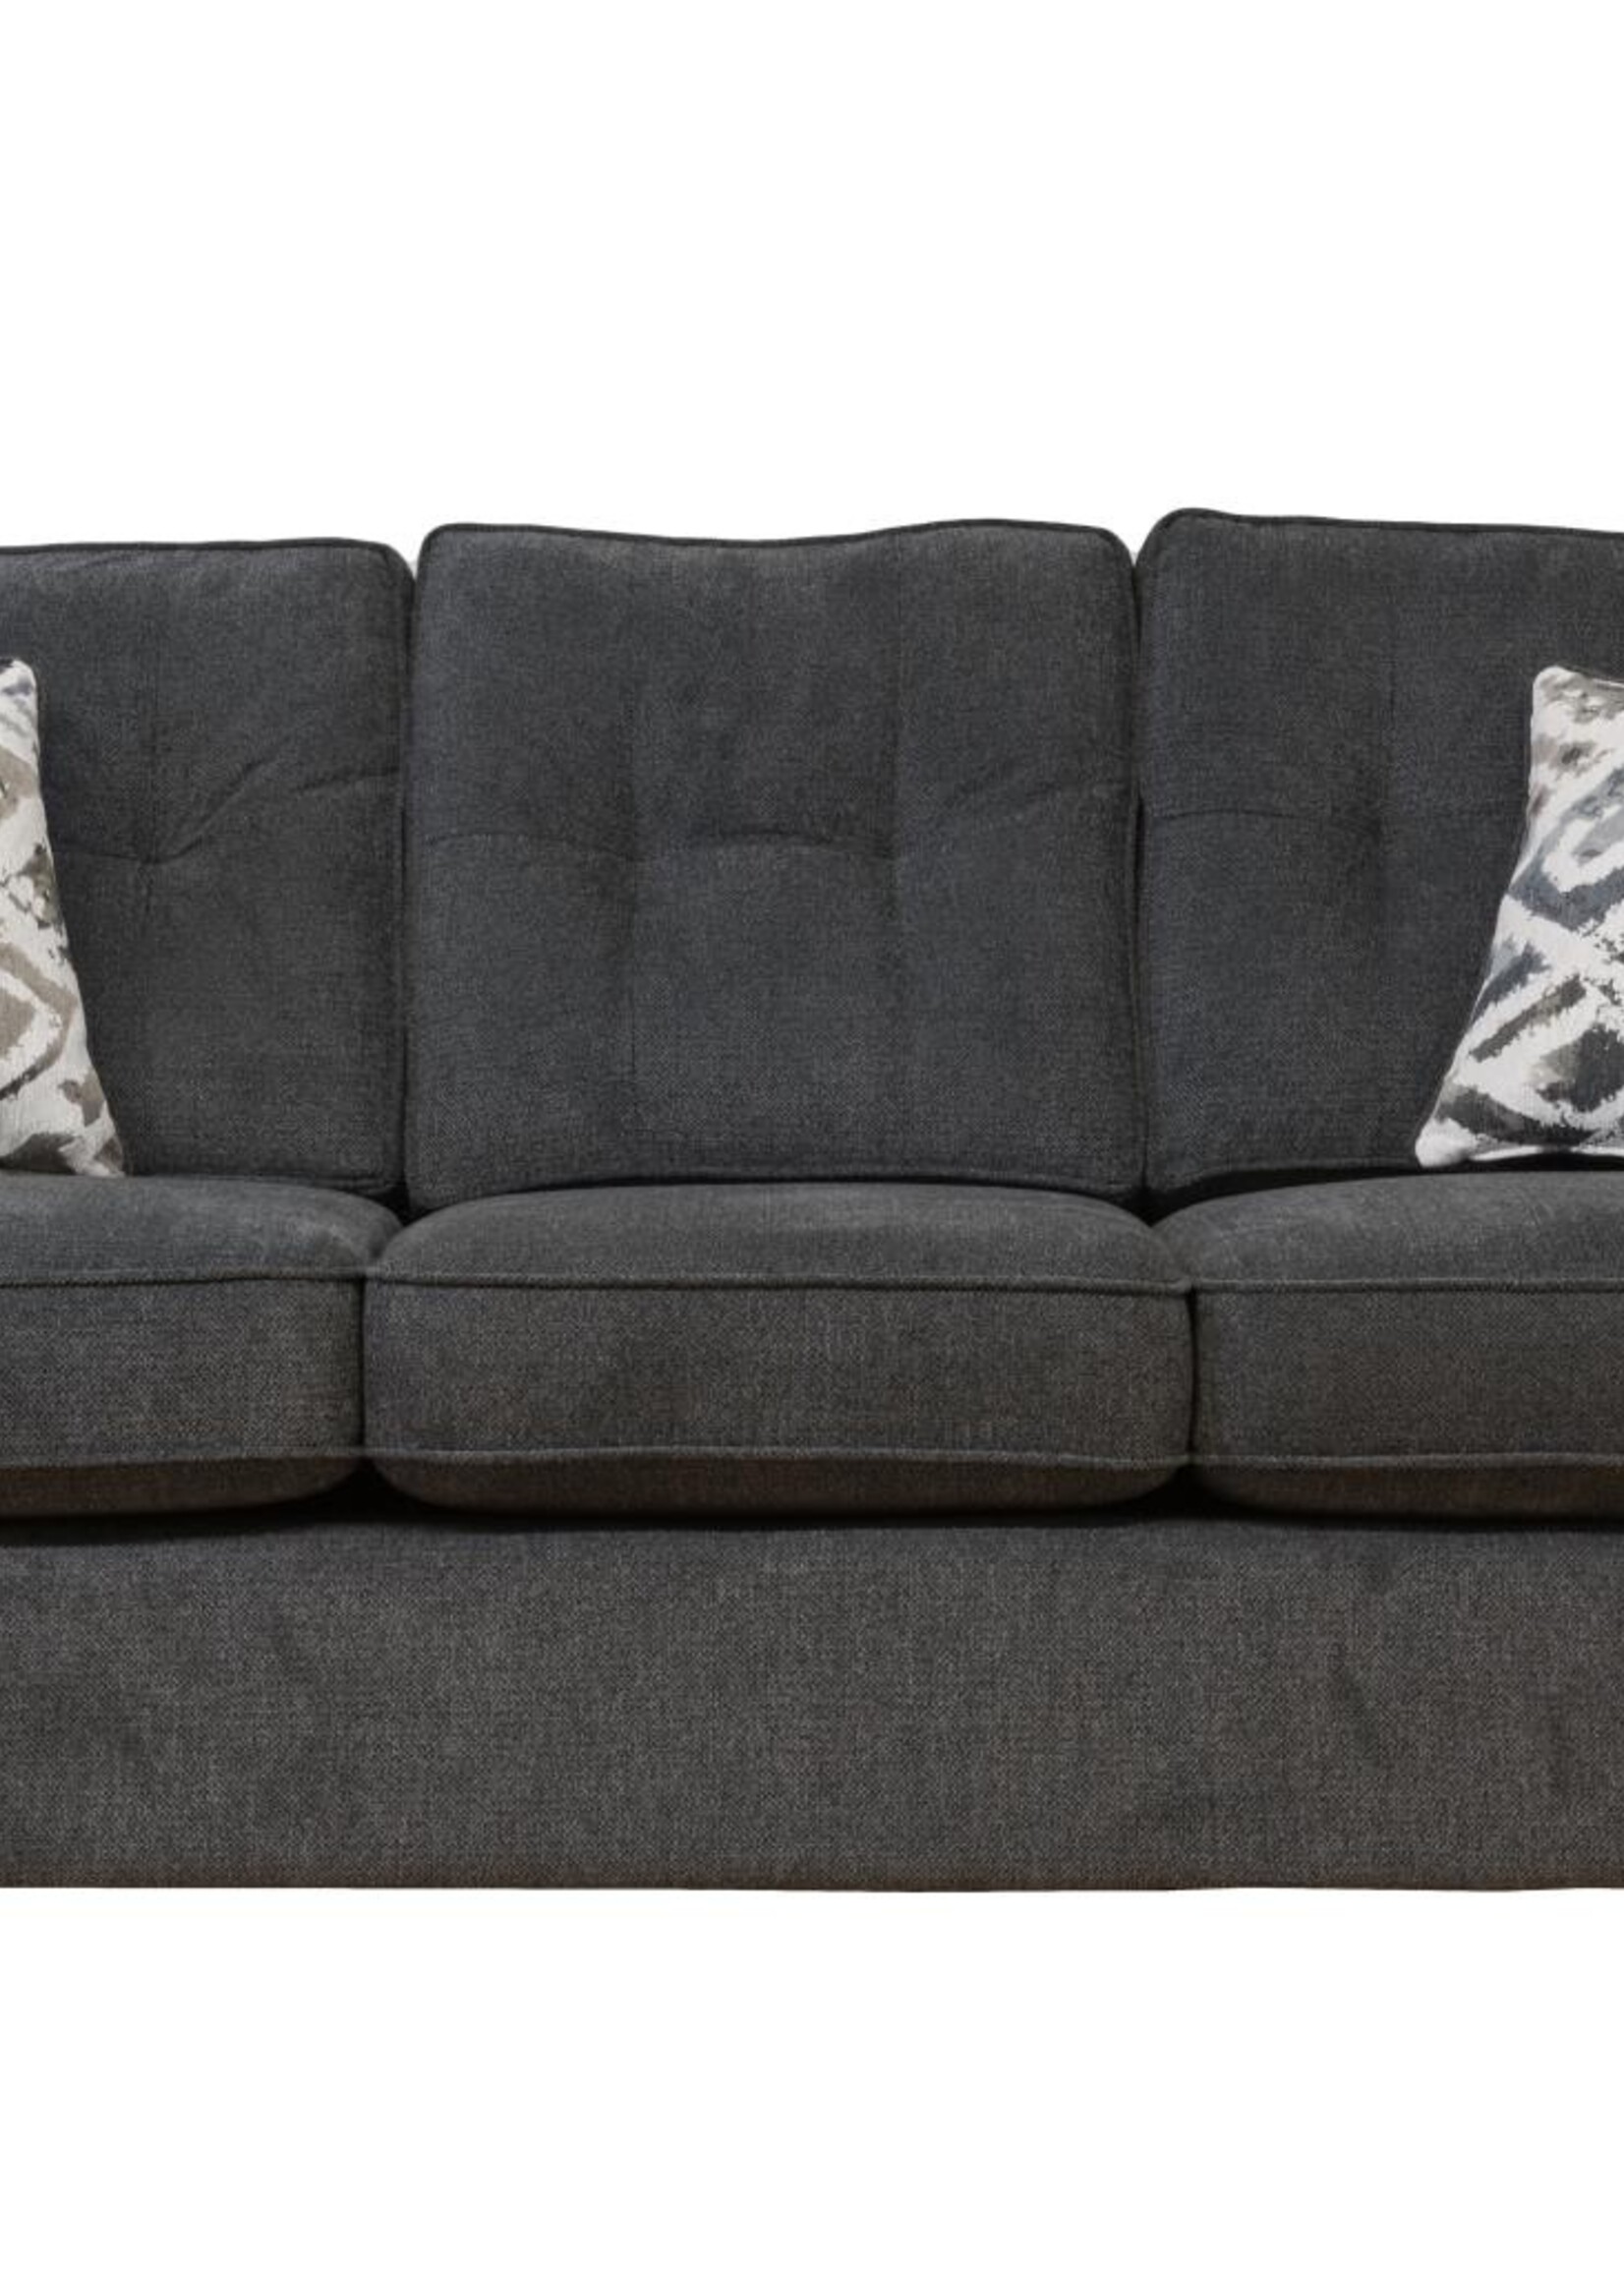 Jackson Collection - Charcoal Surge Anchor Sofa 82x37x38 Canadian Made